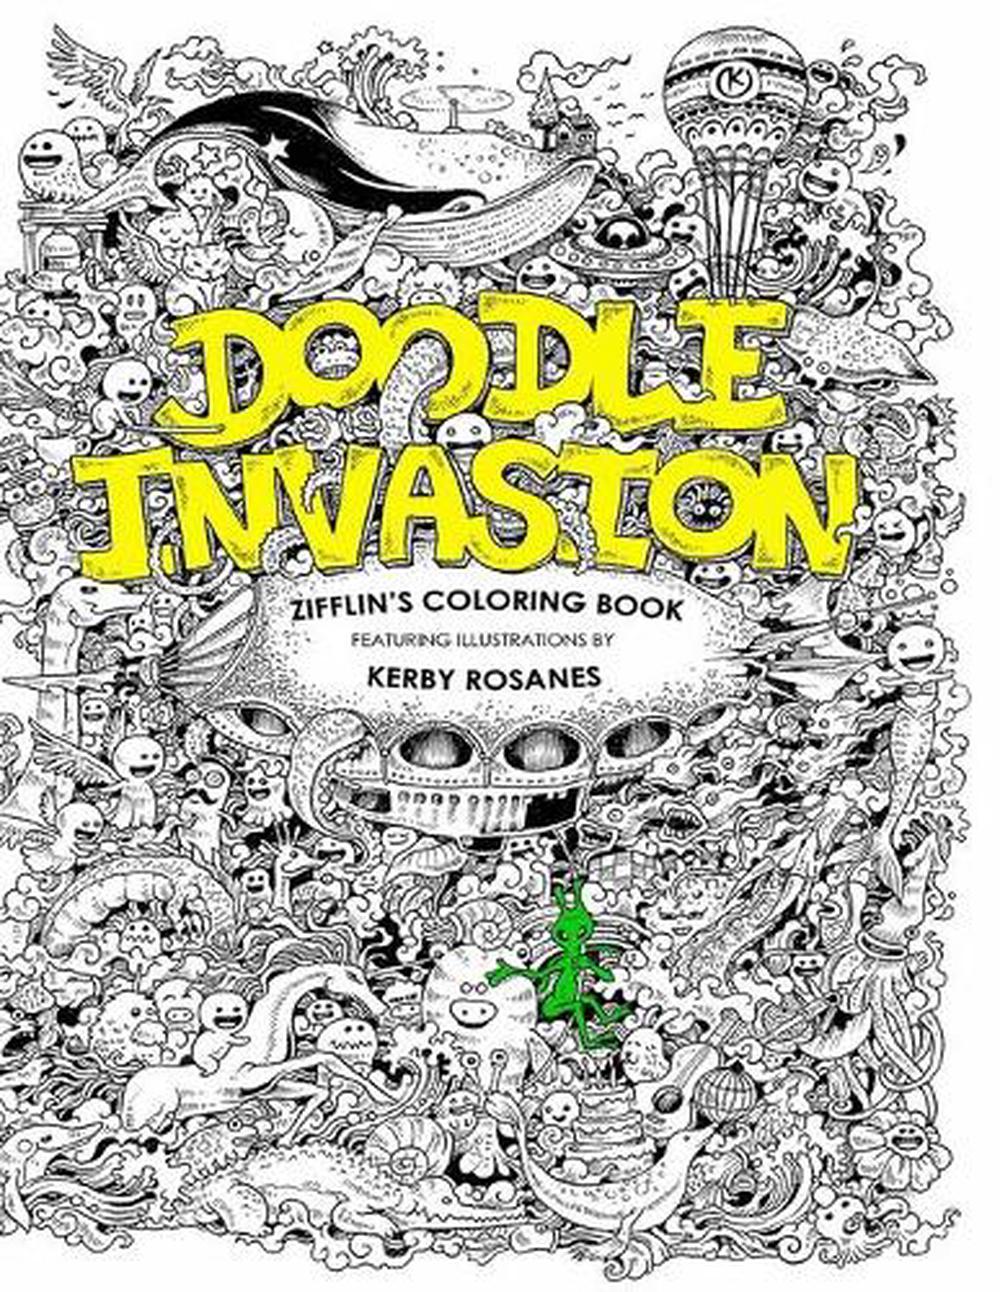 Download Doodle Invasion: Zifflin's Coloring Book by Zifflin (English) Paperback Book Fre 9781492977056 ...